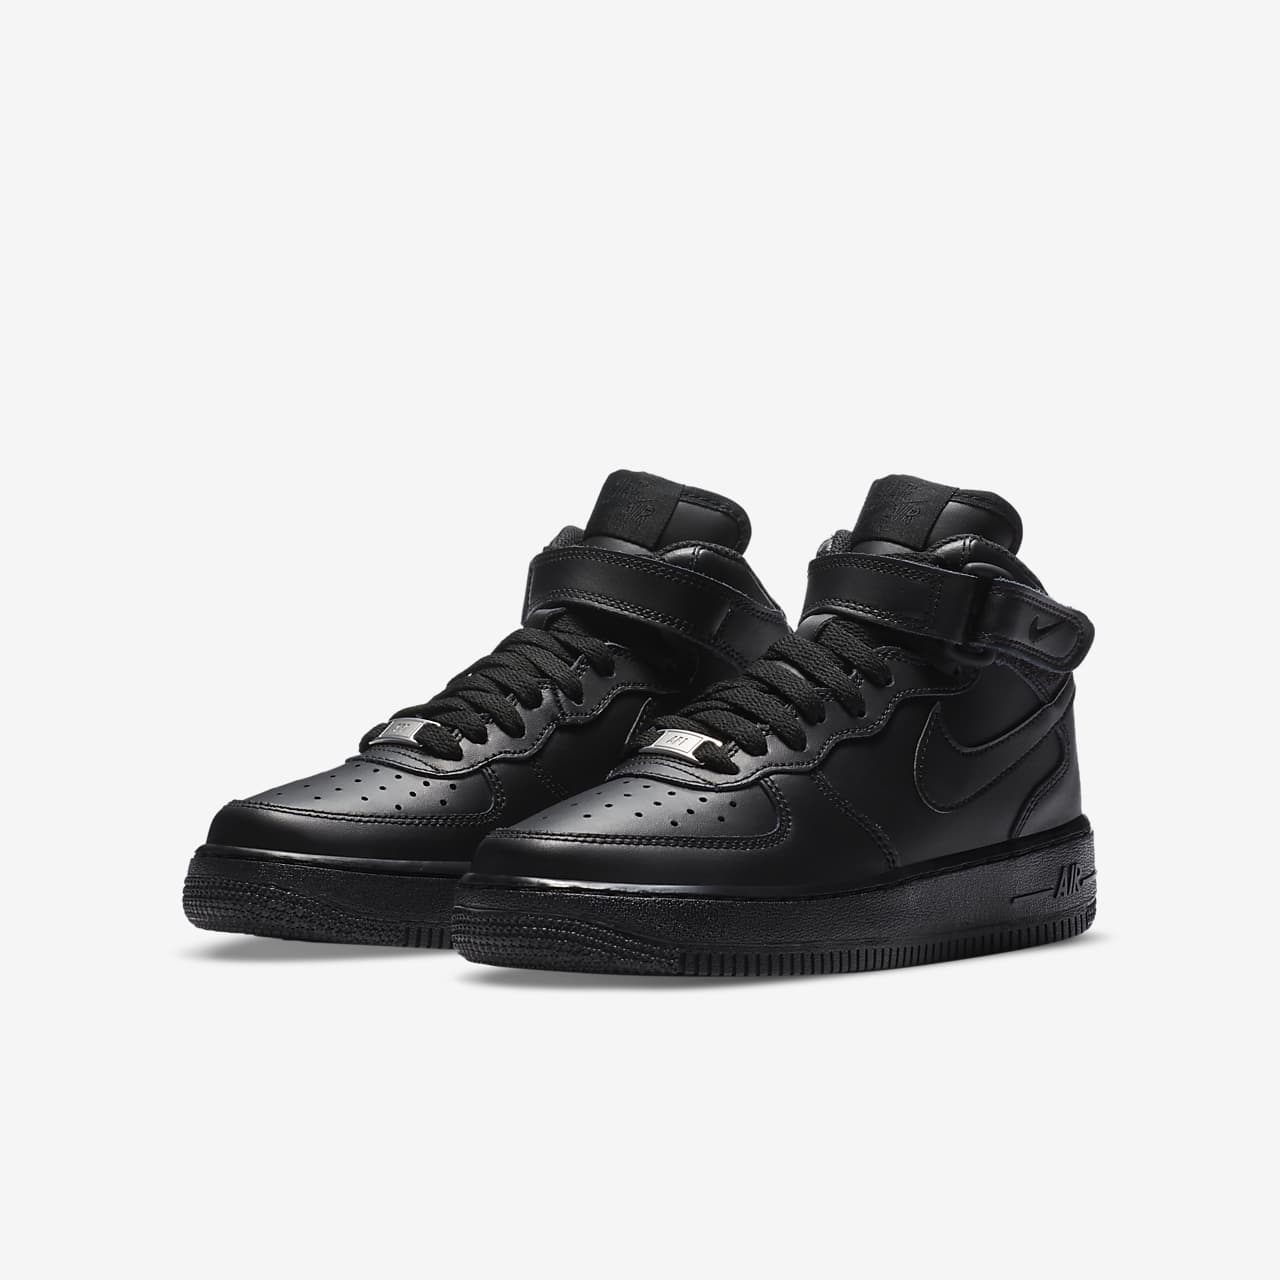 nike air force 1 femme montante